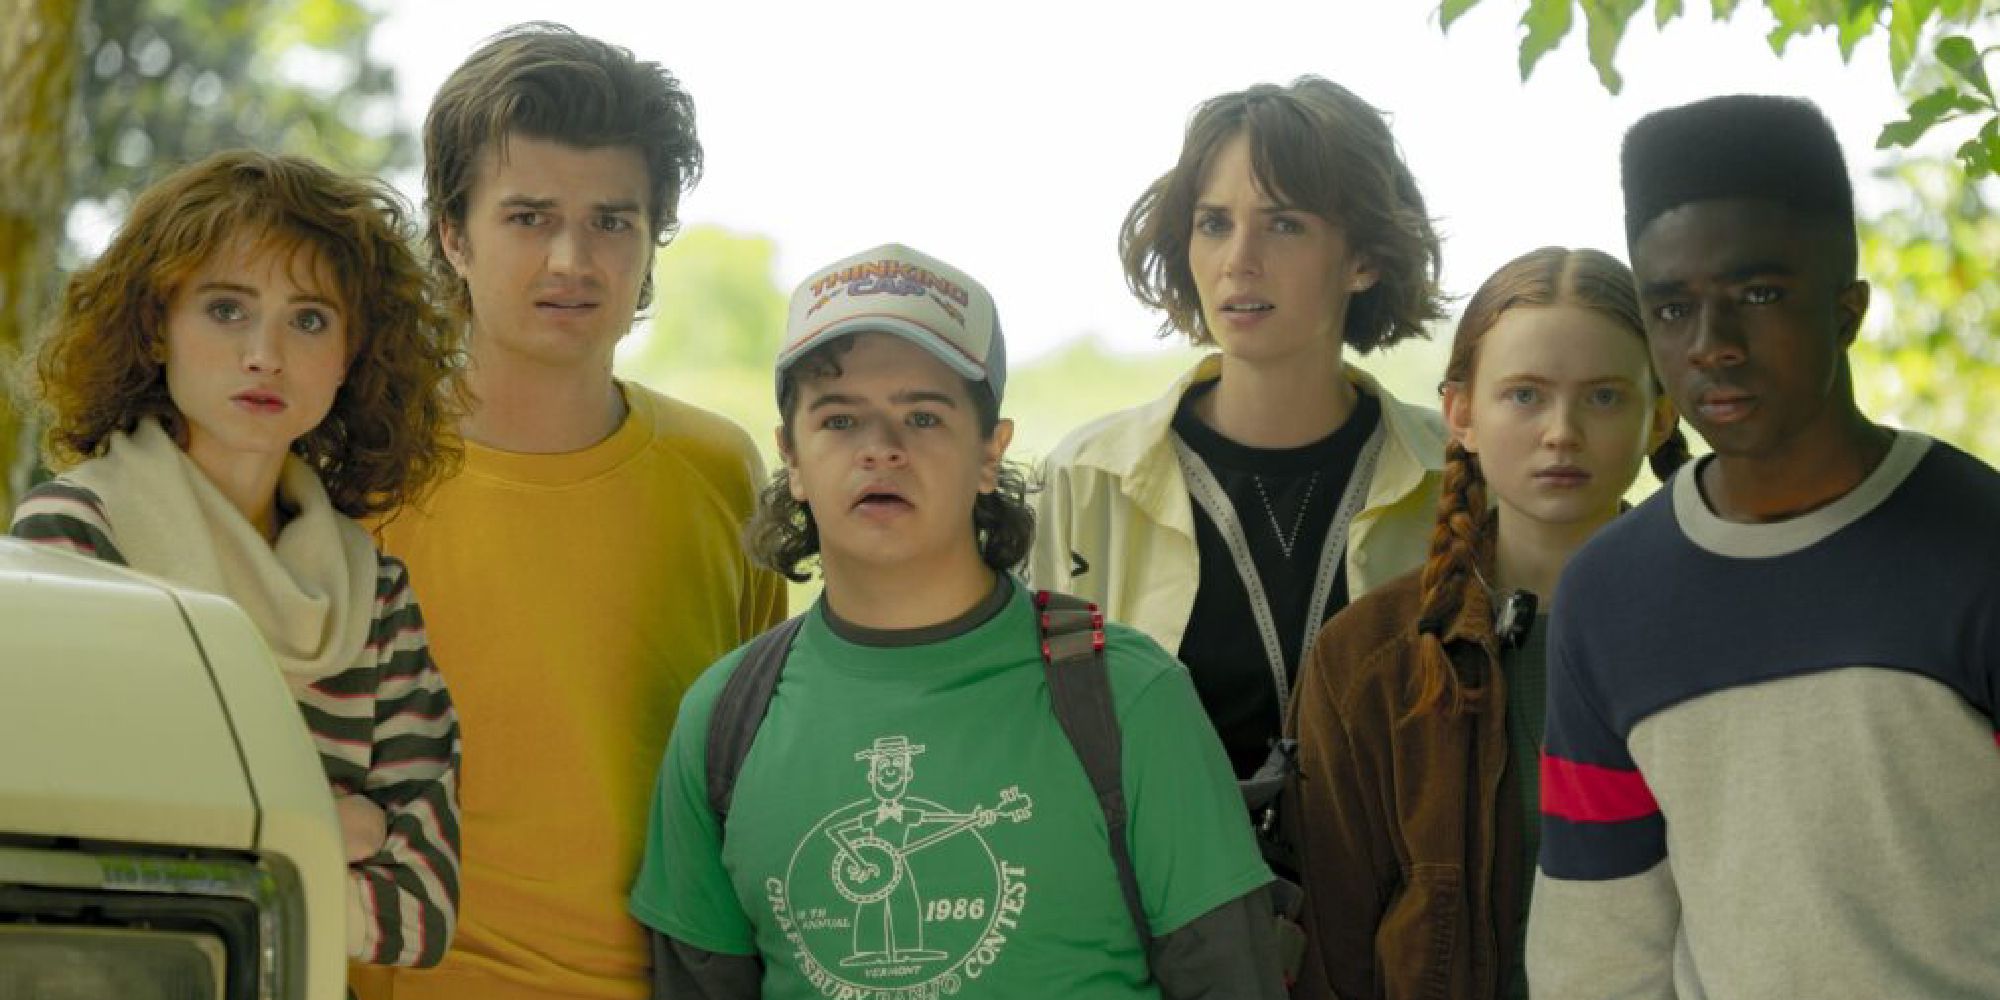 Part of the every-growing ensemble in Stranger Things, looking at something together in varying state of concern or disgust.